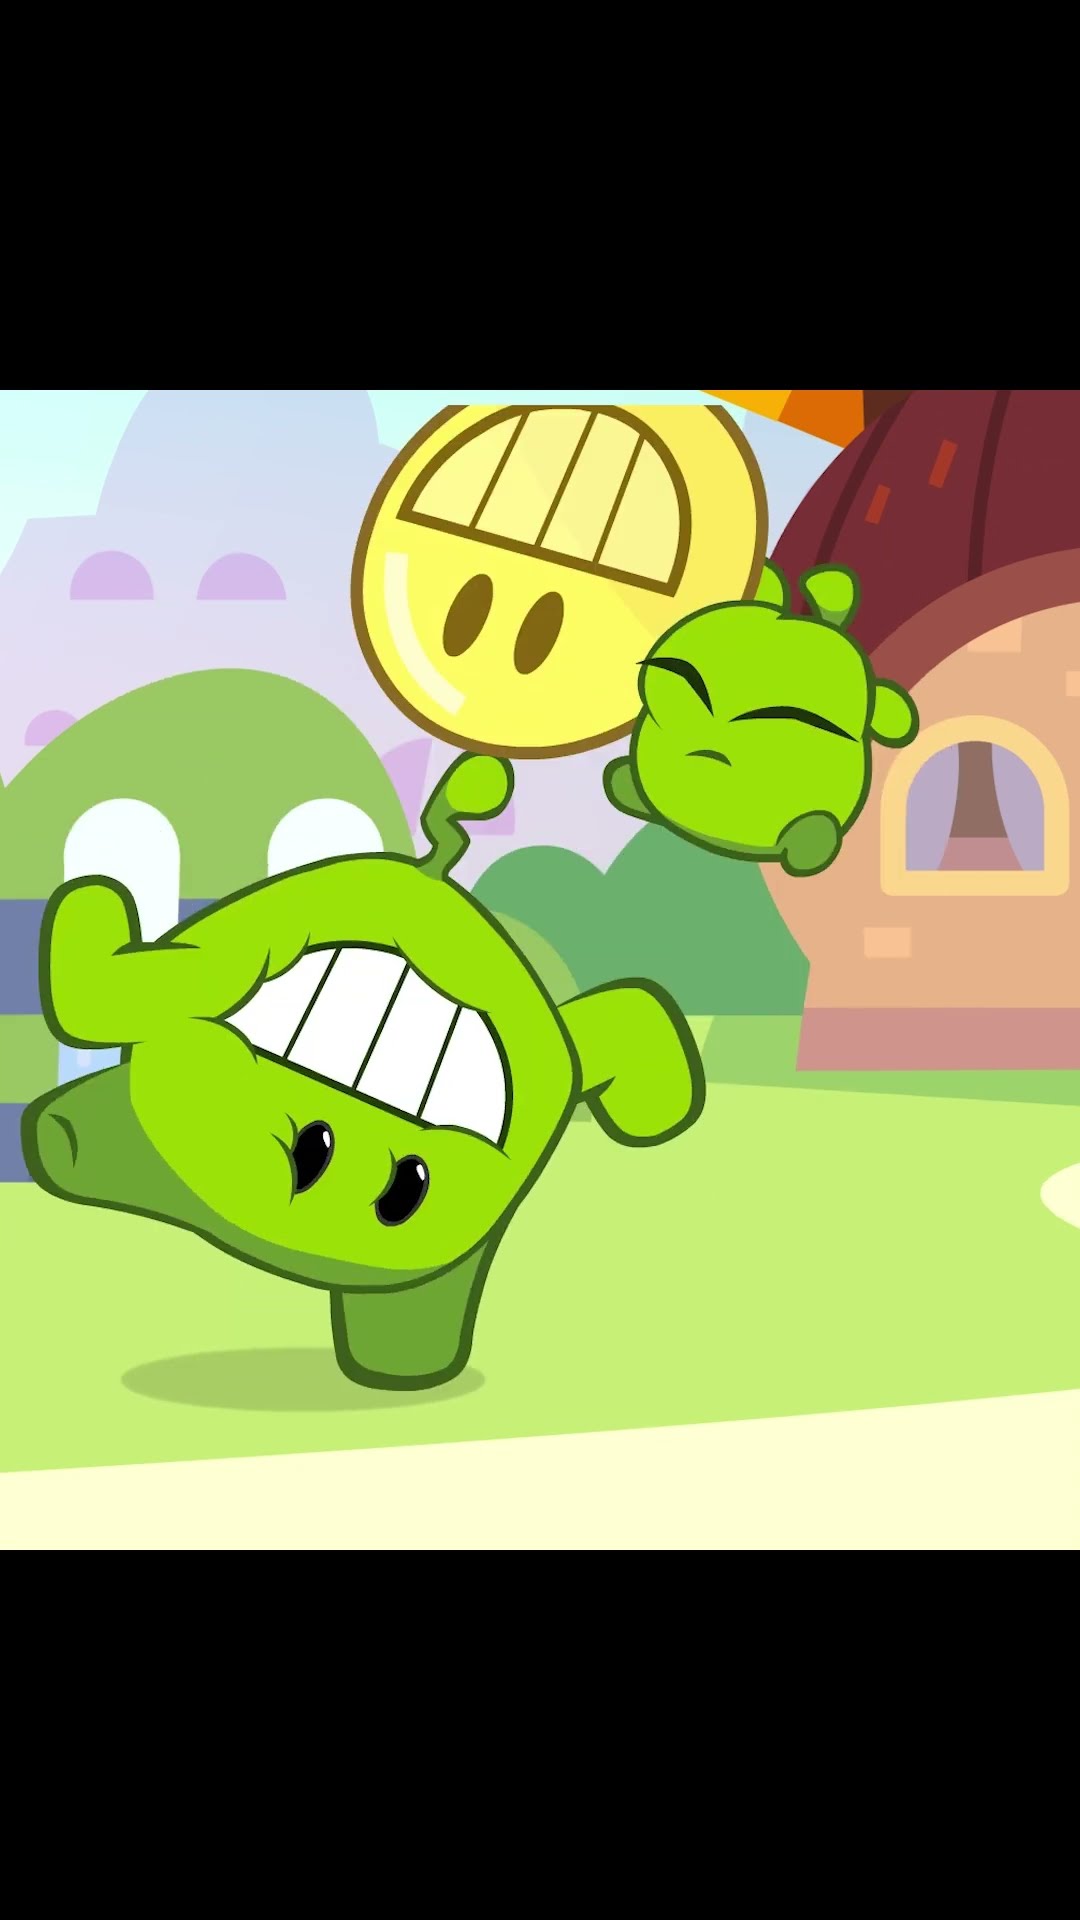 Cut the Rope: Om Nom Stories Seasons 1-8 - ALL EPISODES